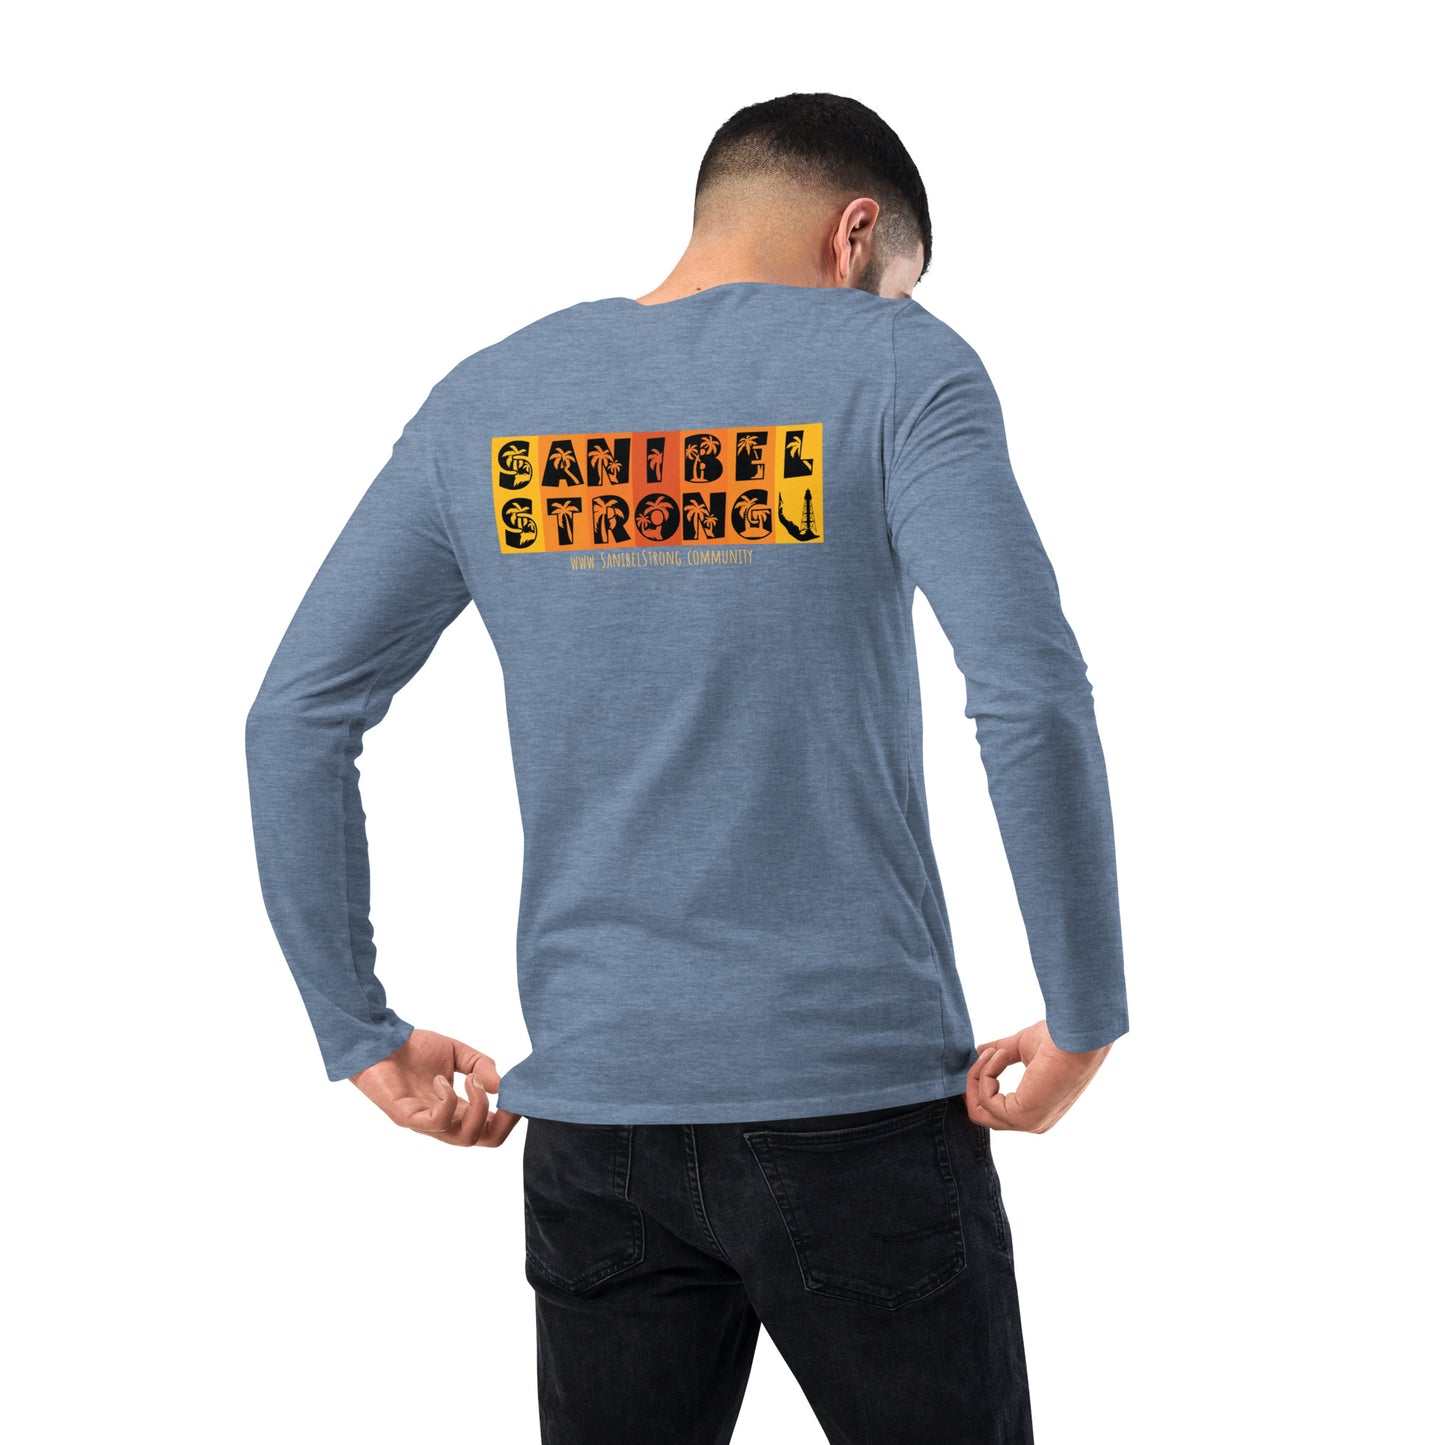 Sanibel Strong Long Sleeve Shirt - Palm Tree Lettering (2 sided design)